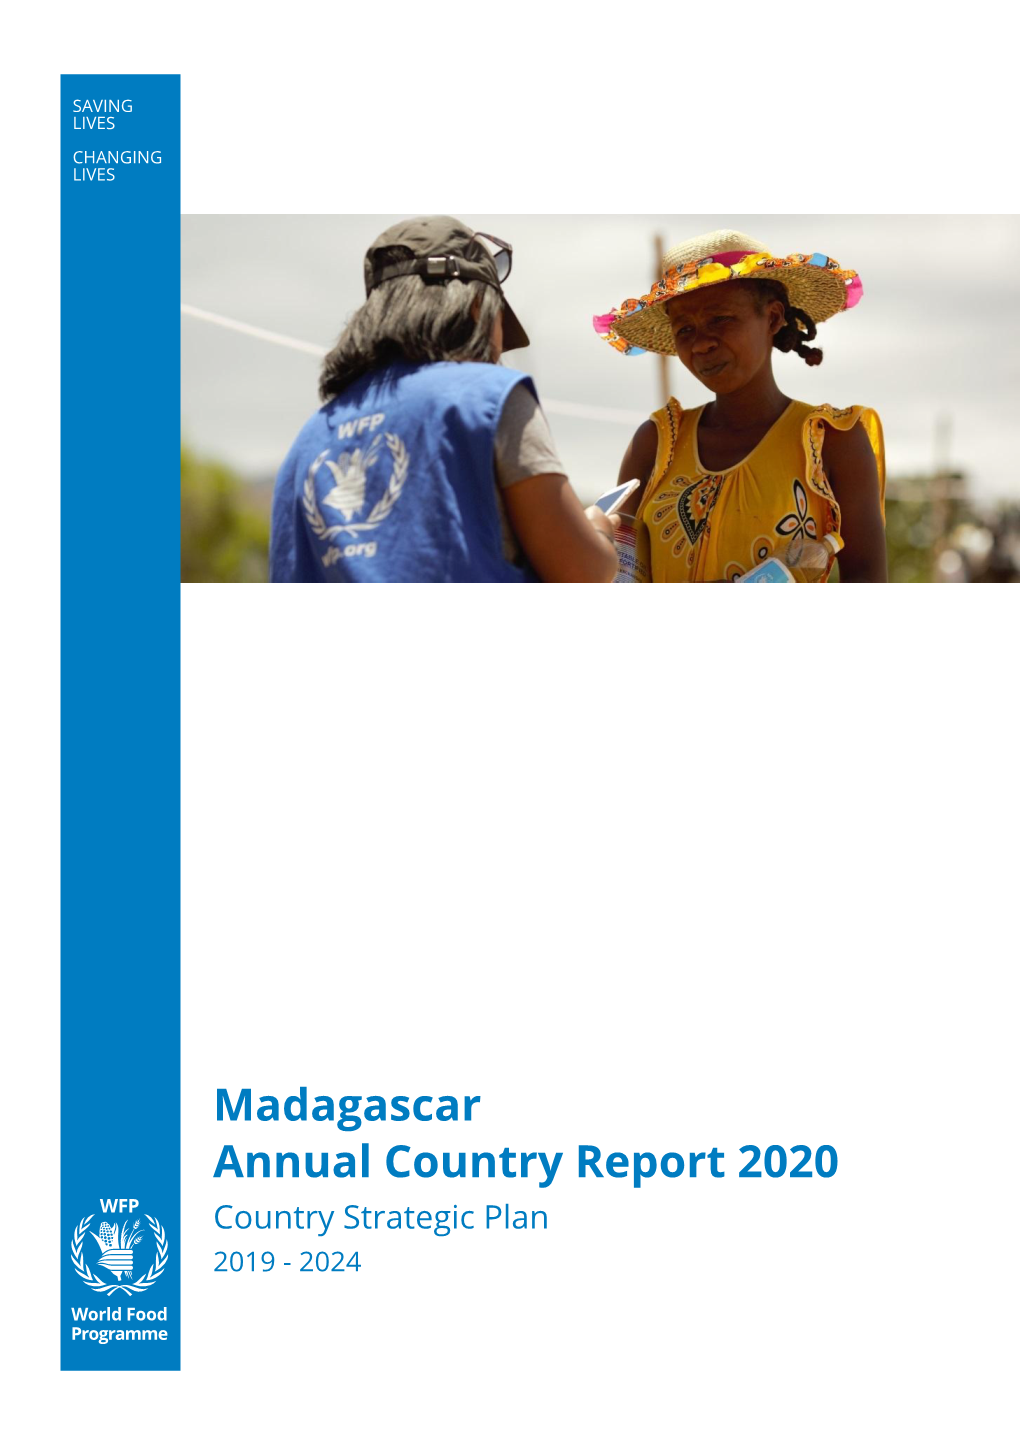 Madagascar Annual Country Report 2020 Country Strategic Plan 2019 - 2024 Table of Contents